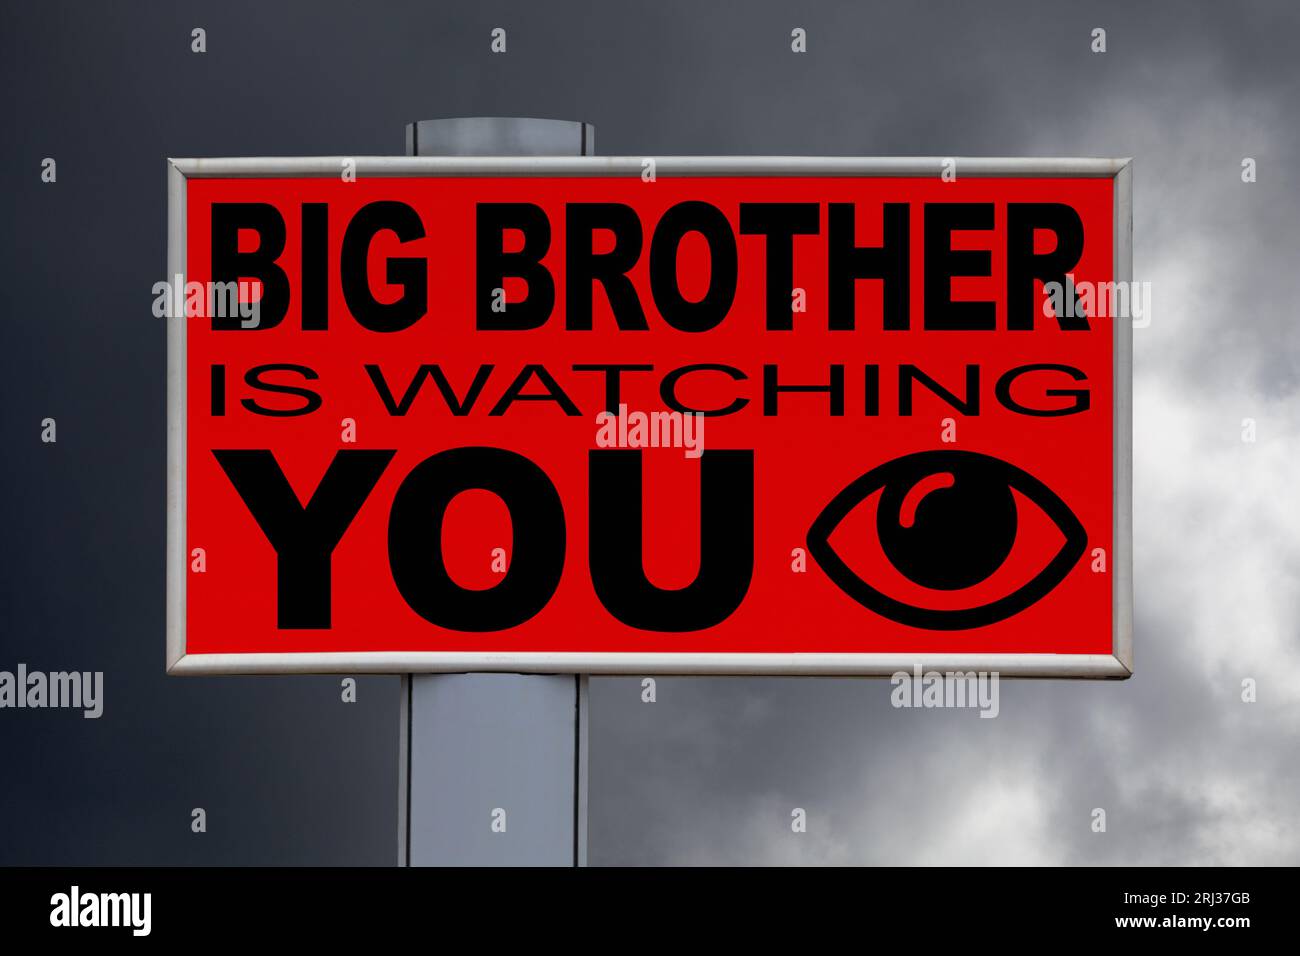 Close-up on a red billboard against a cloudy sky with the message 'Big Brother is watching you' written in the middle next to an eye icon. Stock Photo